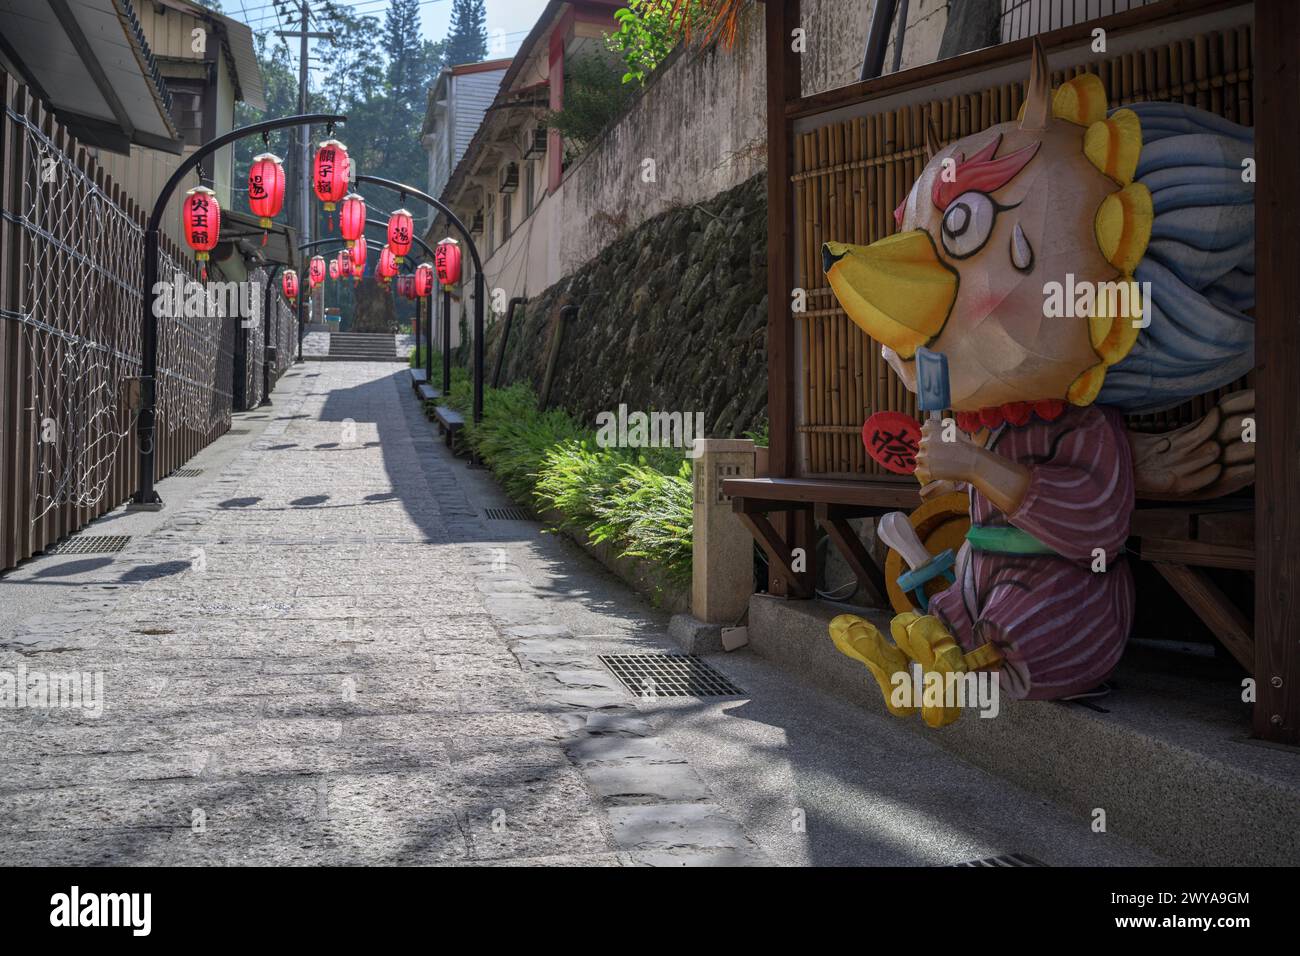 A peaceful alleyway in Guanziling Hot Spring adorned with red lanterns and an paper figure Stock Photo